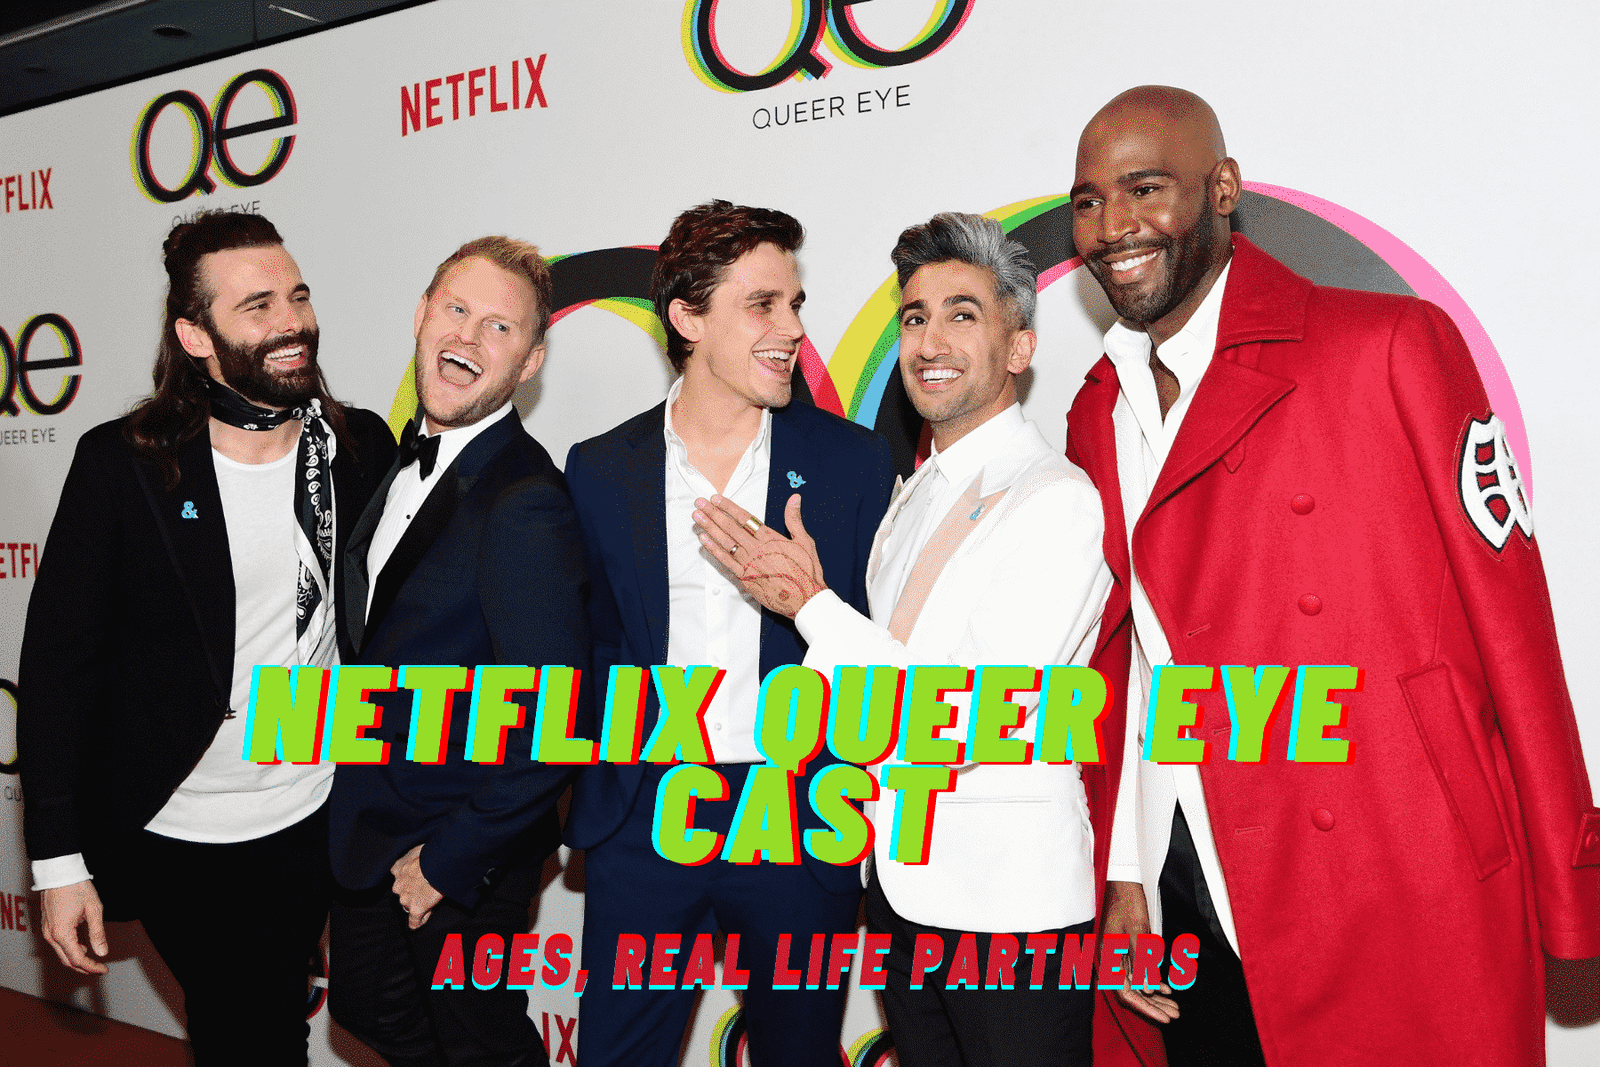 Netflix Queer Eye Cast - Ages, Real Life Partner